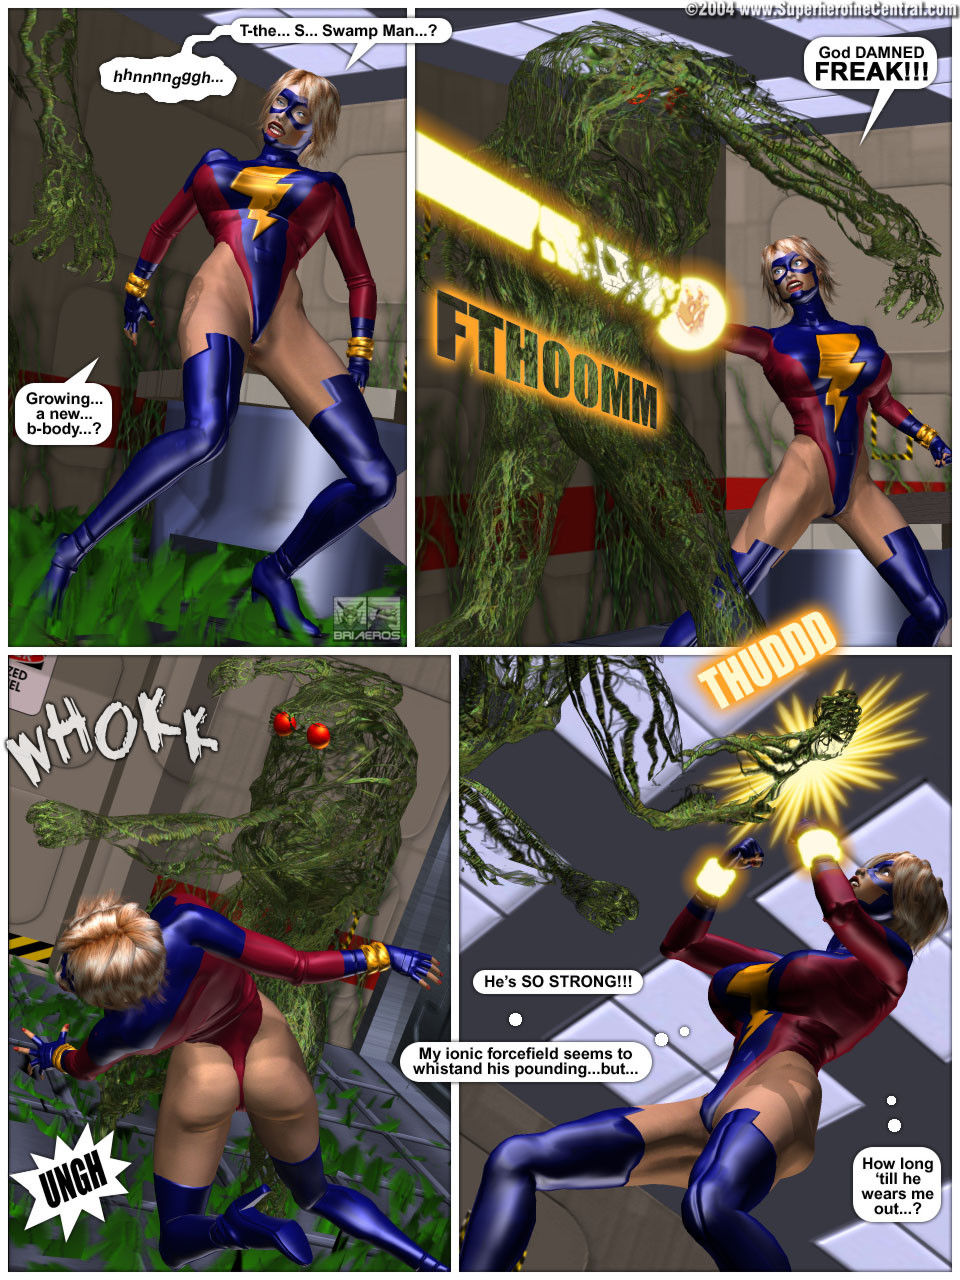 Tall To Arouse - Inside a Green Hell - Superheroinecentral page 22